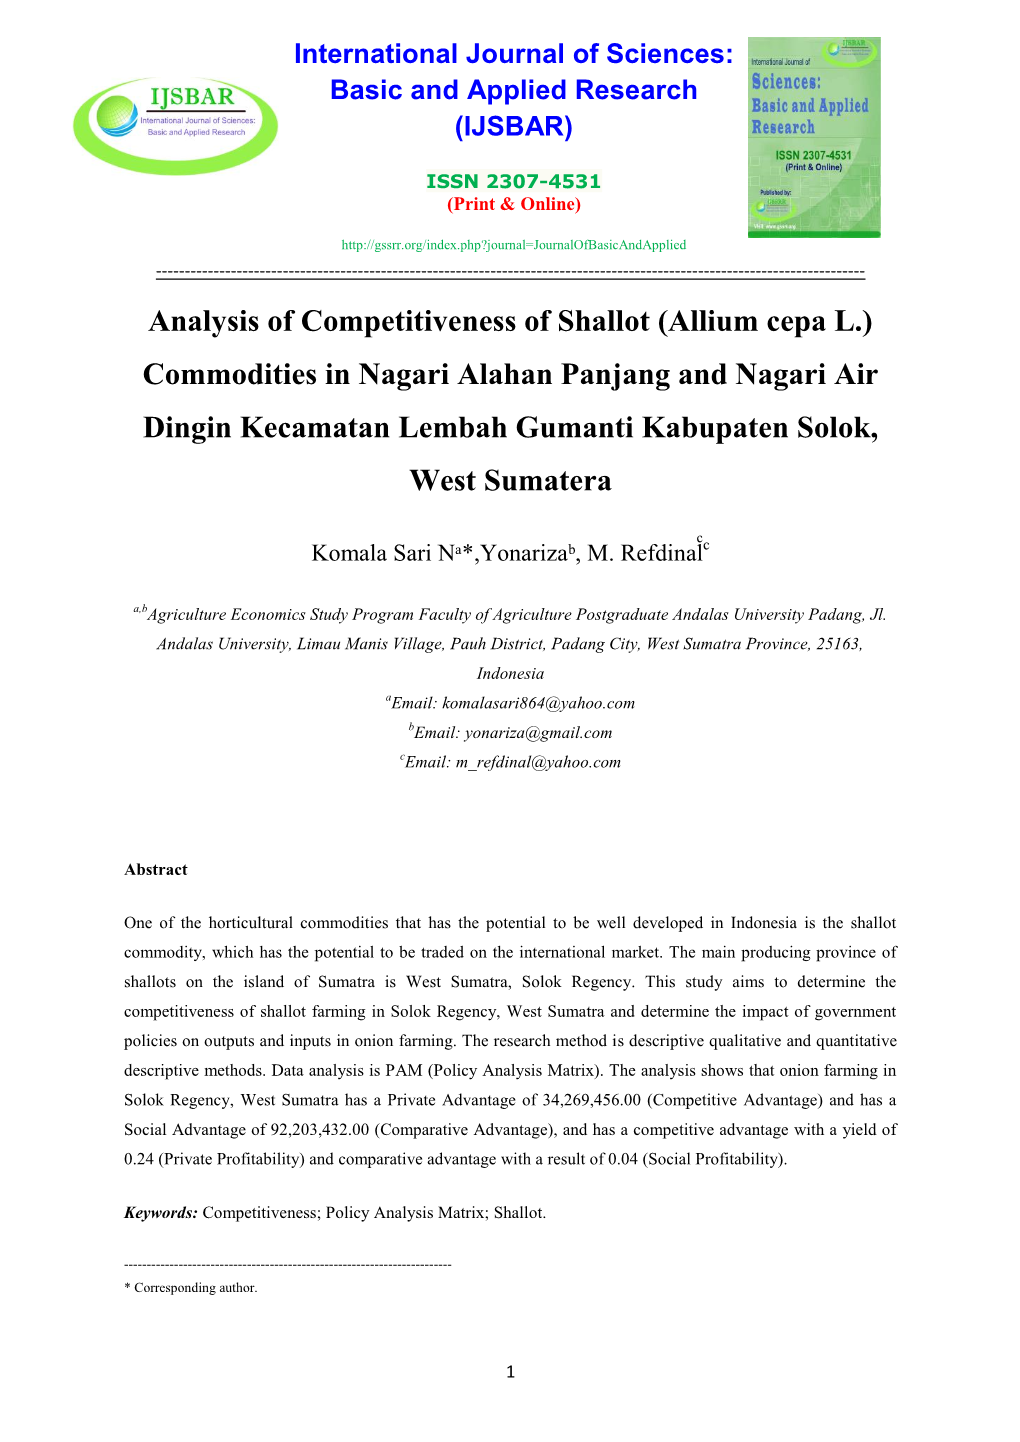 Analysis of Competitiveness of Shallot (Allium Cepa L.) Commodities In